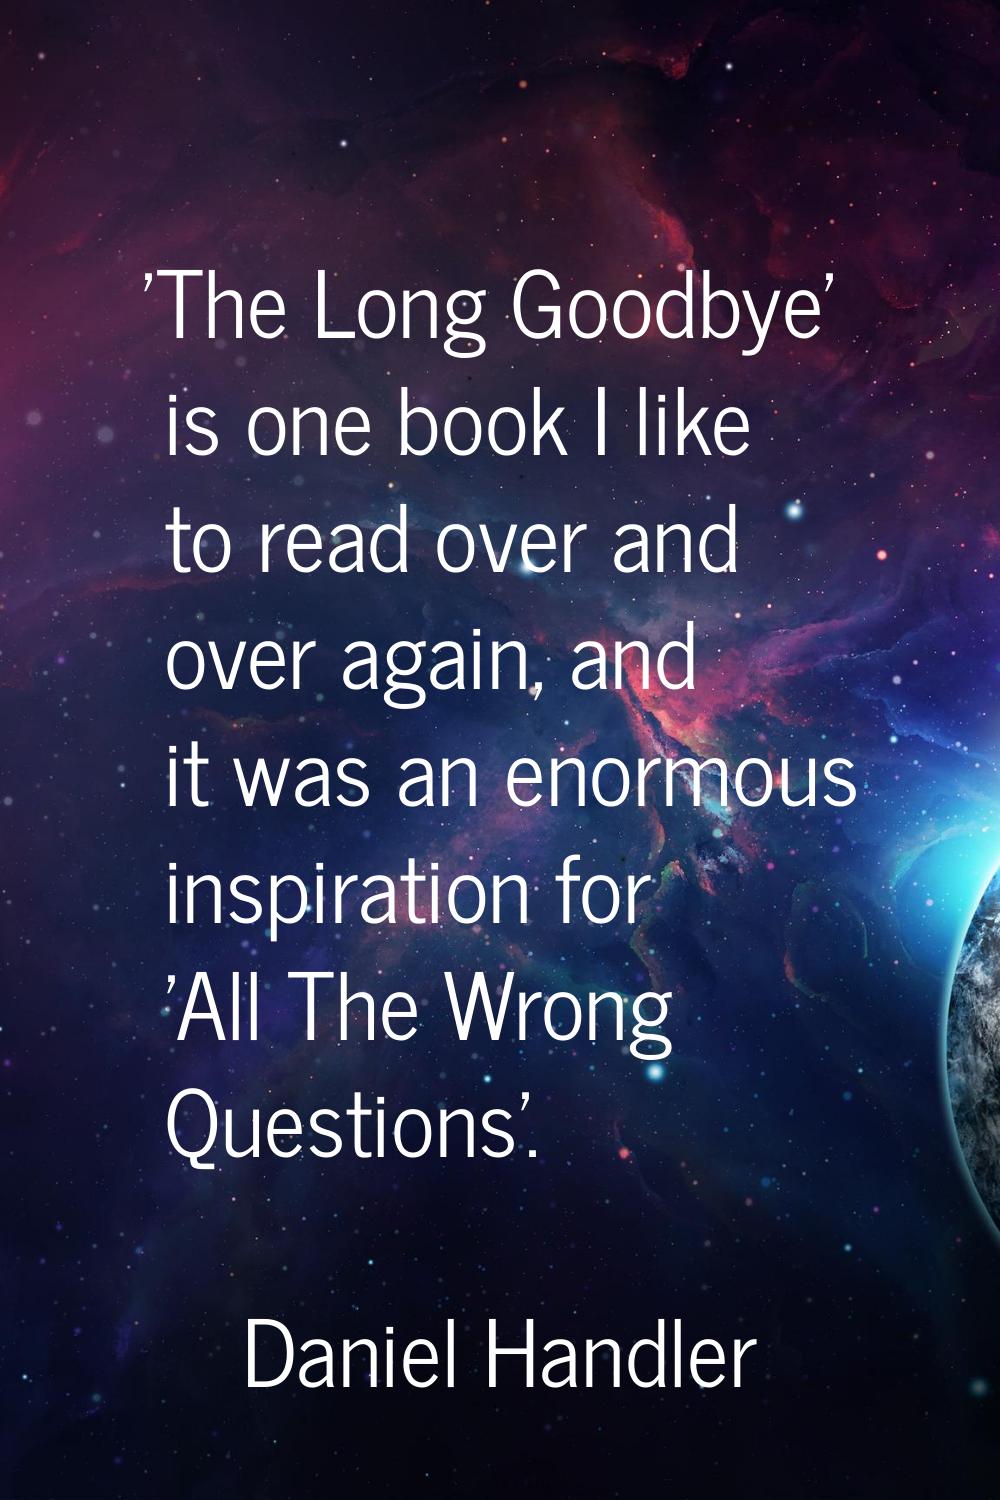 'The Long Goodbye' is one book I like to read over and over again, and it was an enormous inspirati